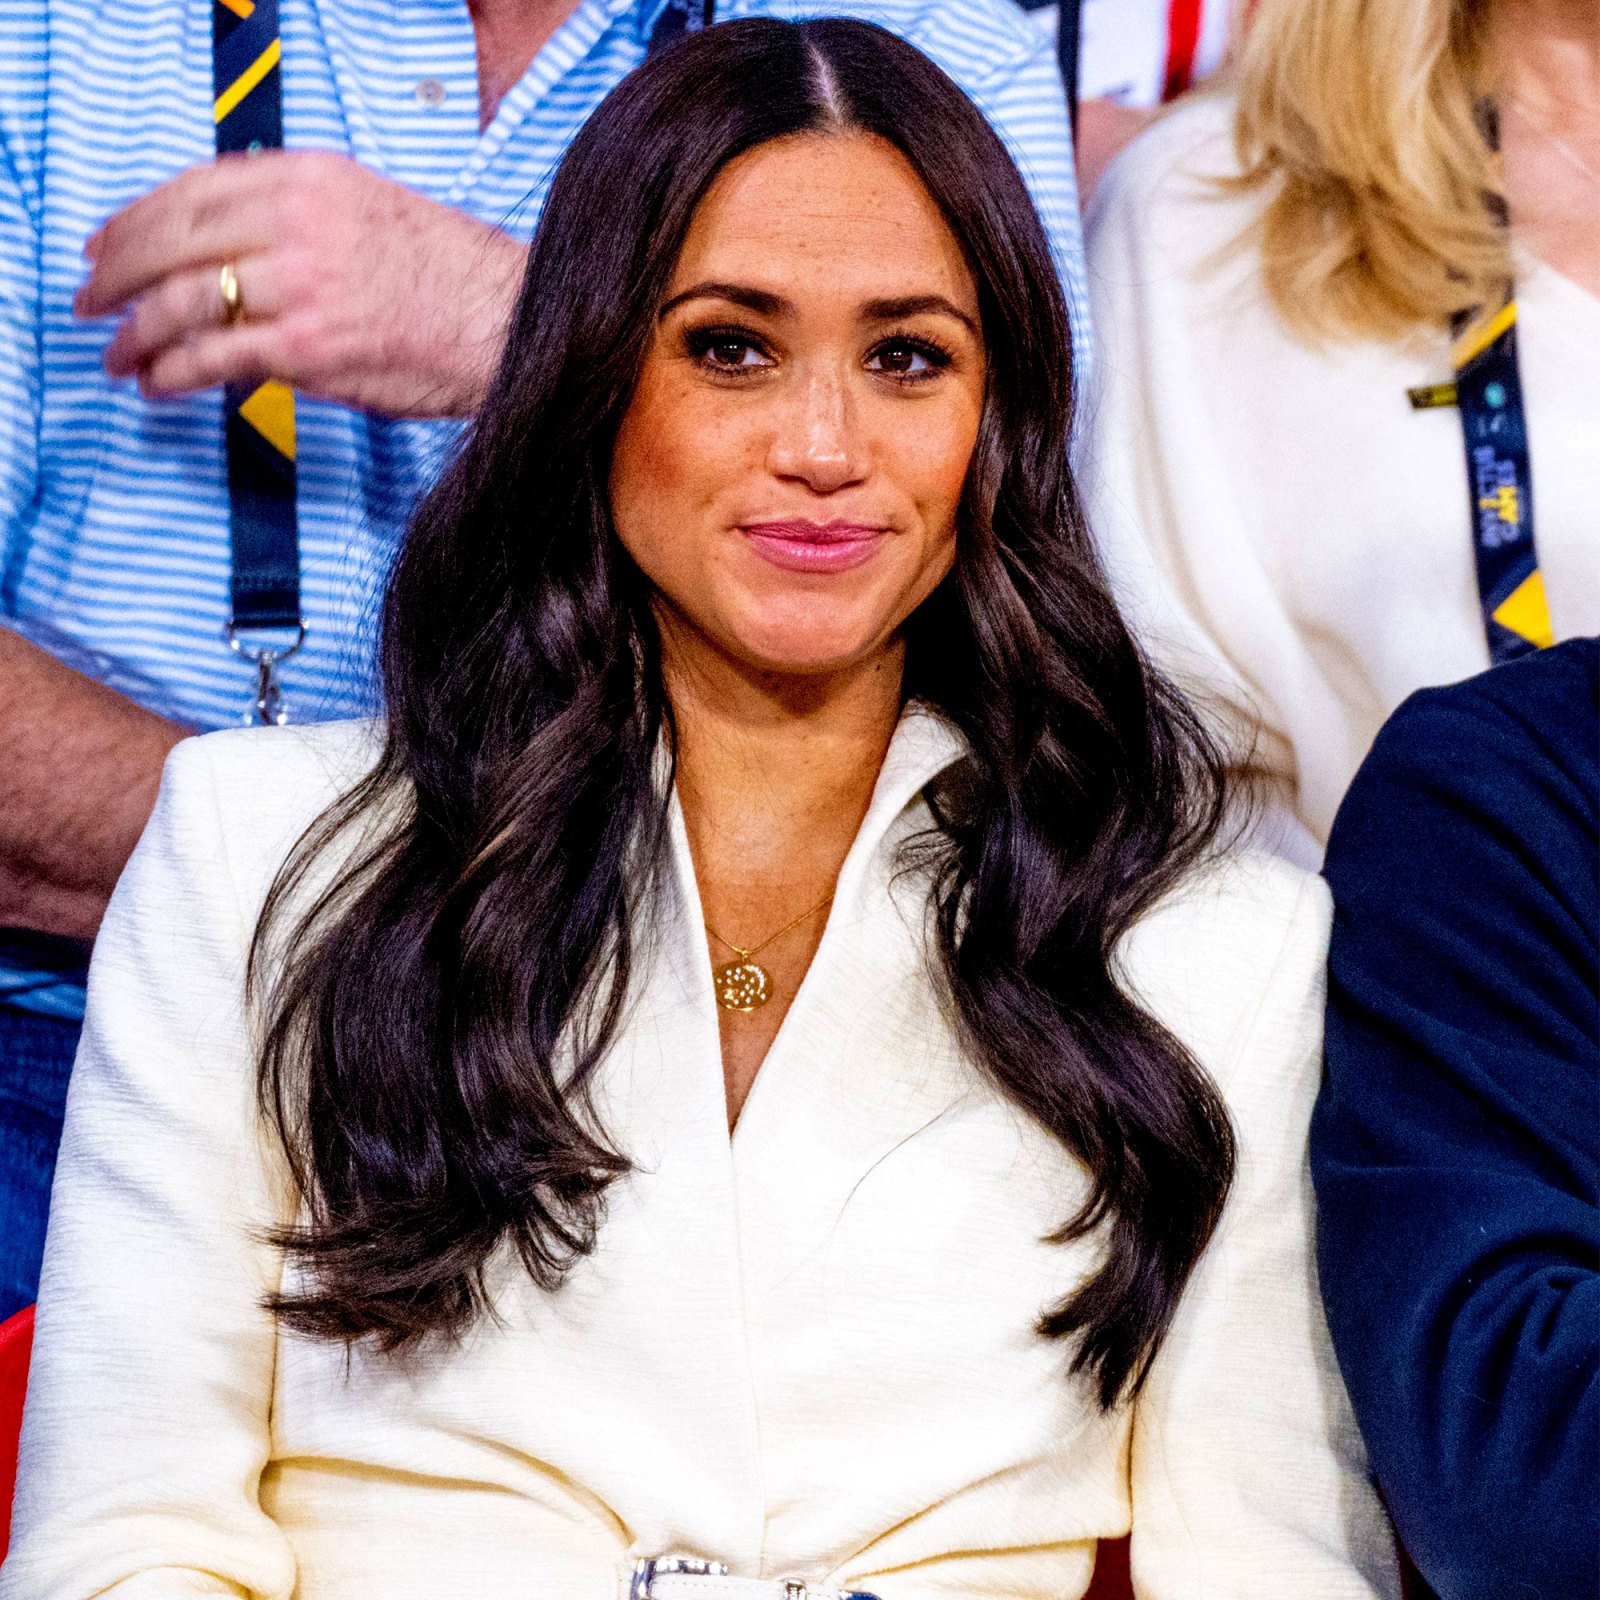 Meghan Markle Says She Was an 'Ugly Duckling' Growing Up: I Was a 'Loner'